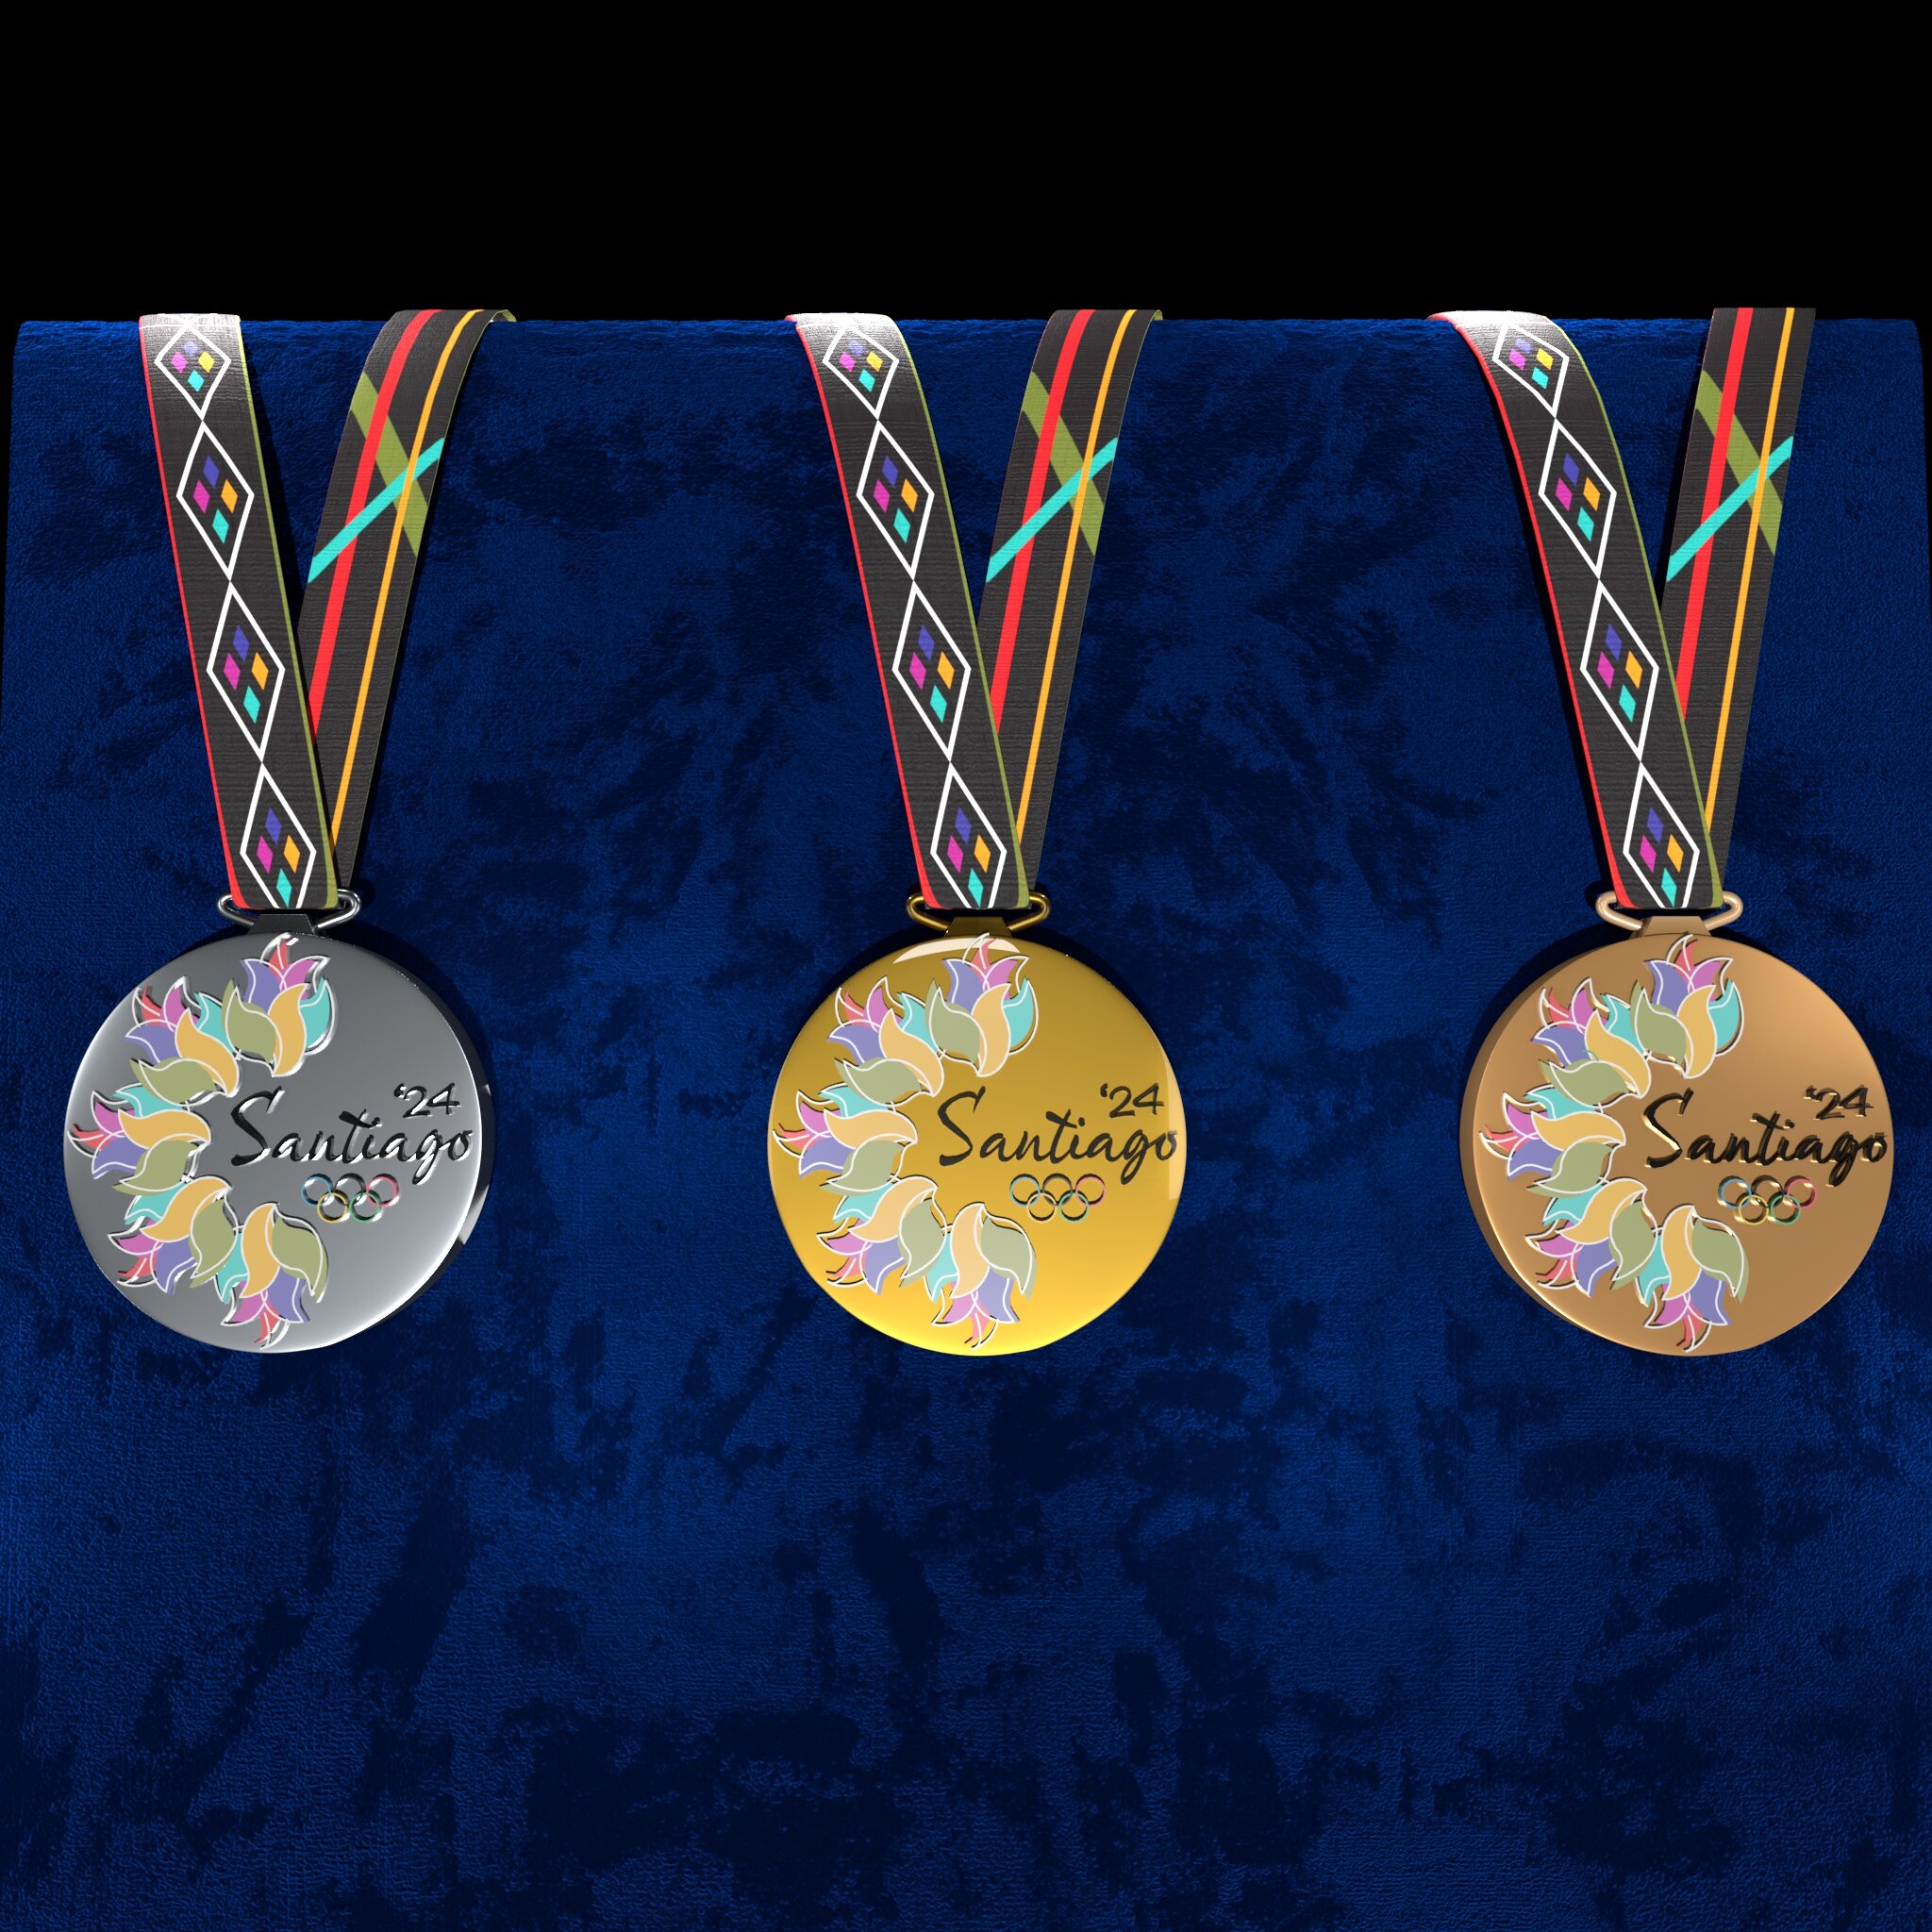 Olympic Gold Medal 2024 Philippe Starck S Paris 2024 Olympic Medals